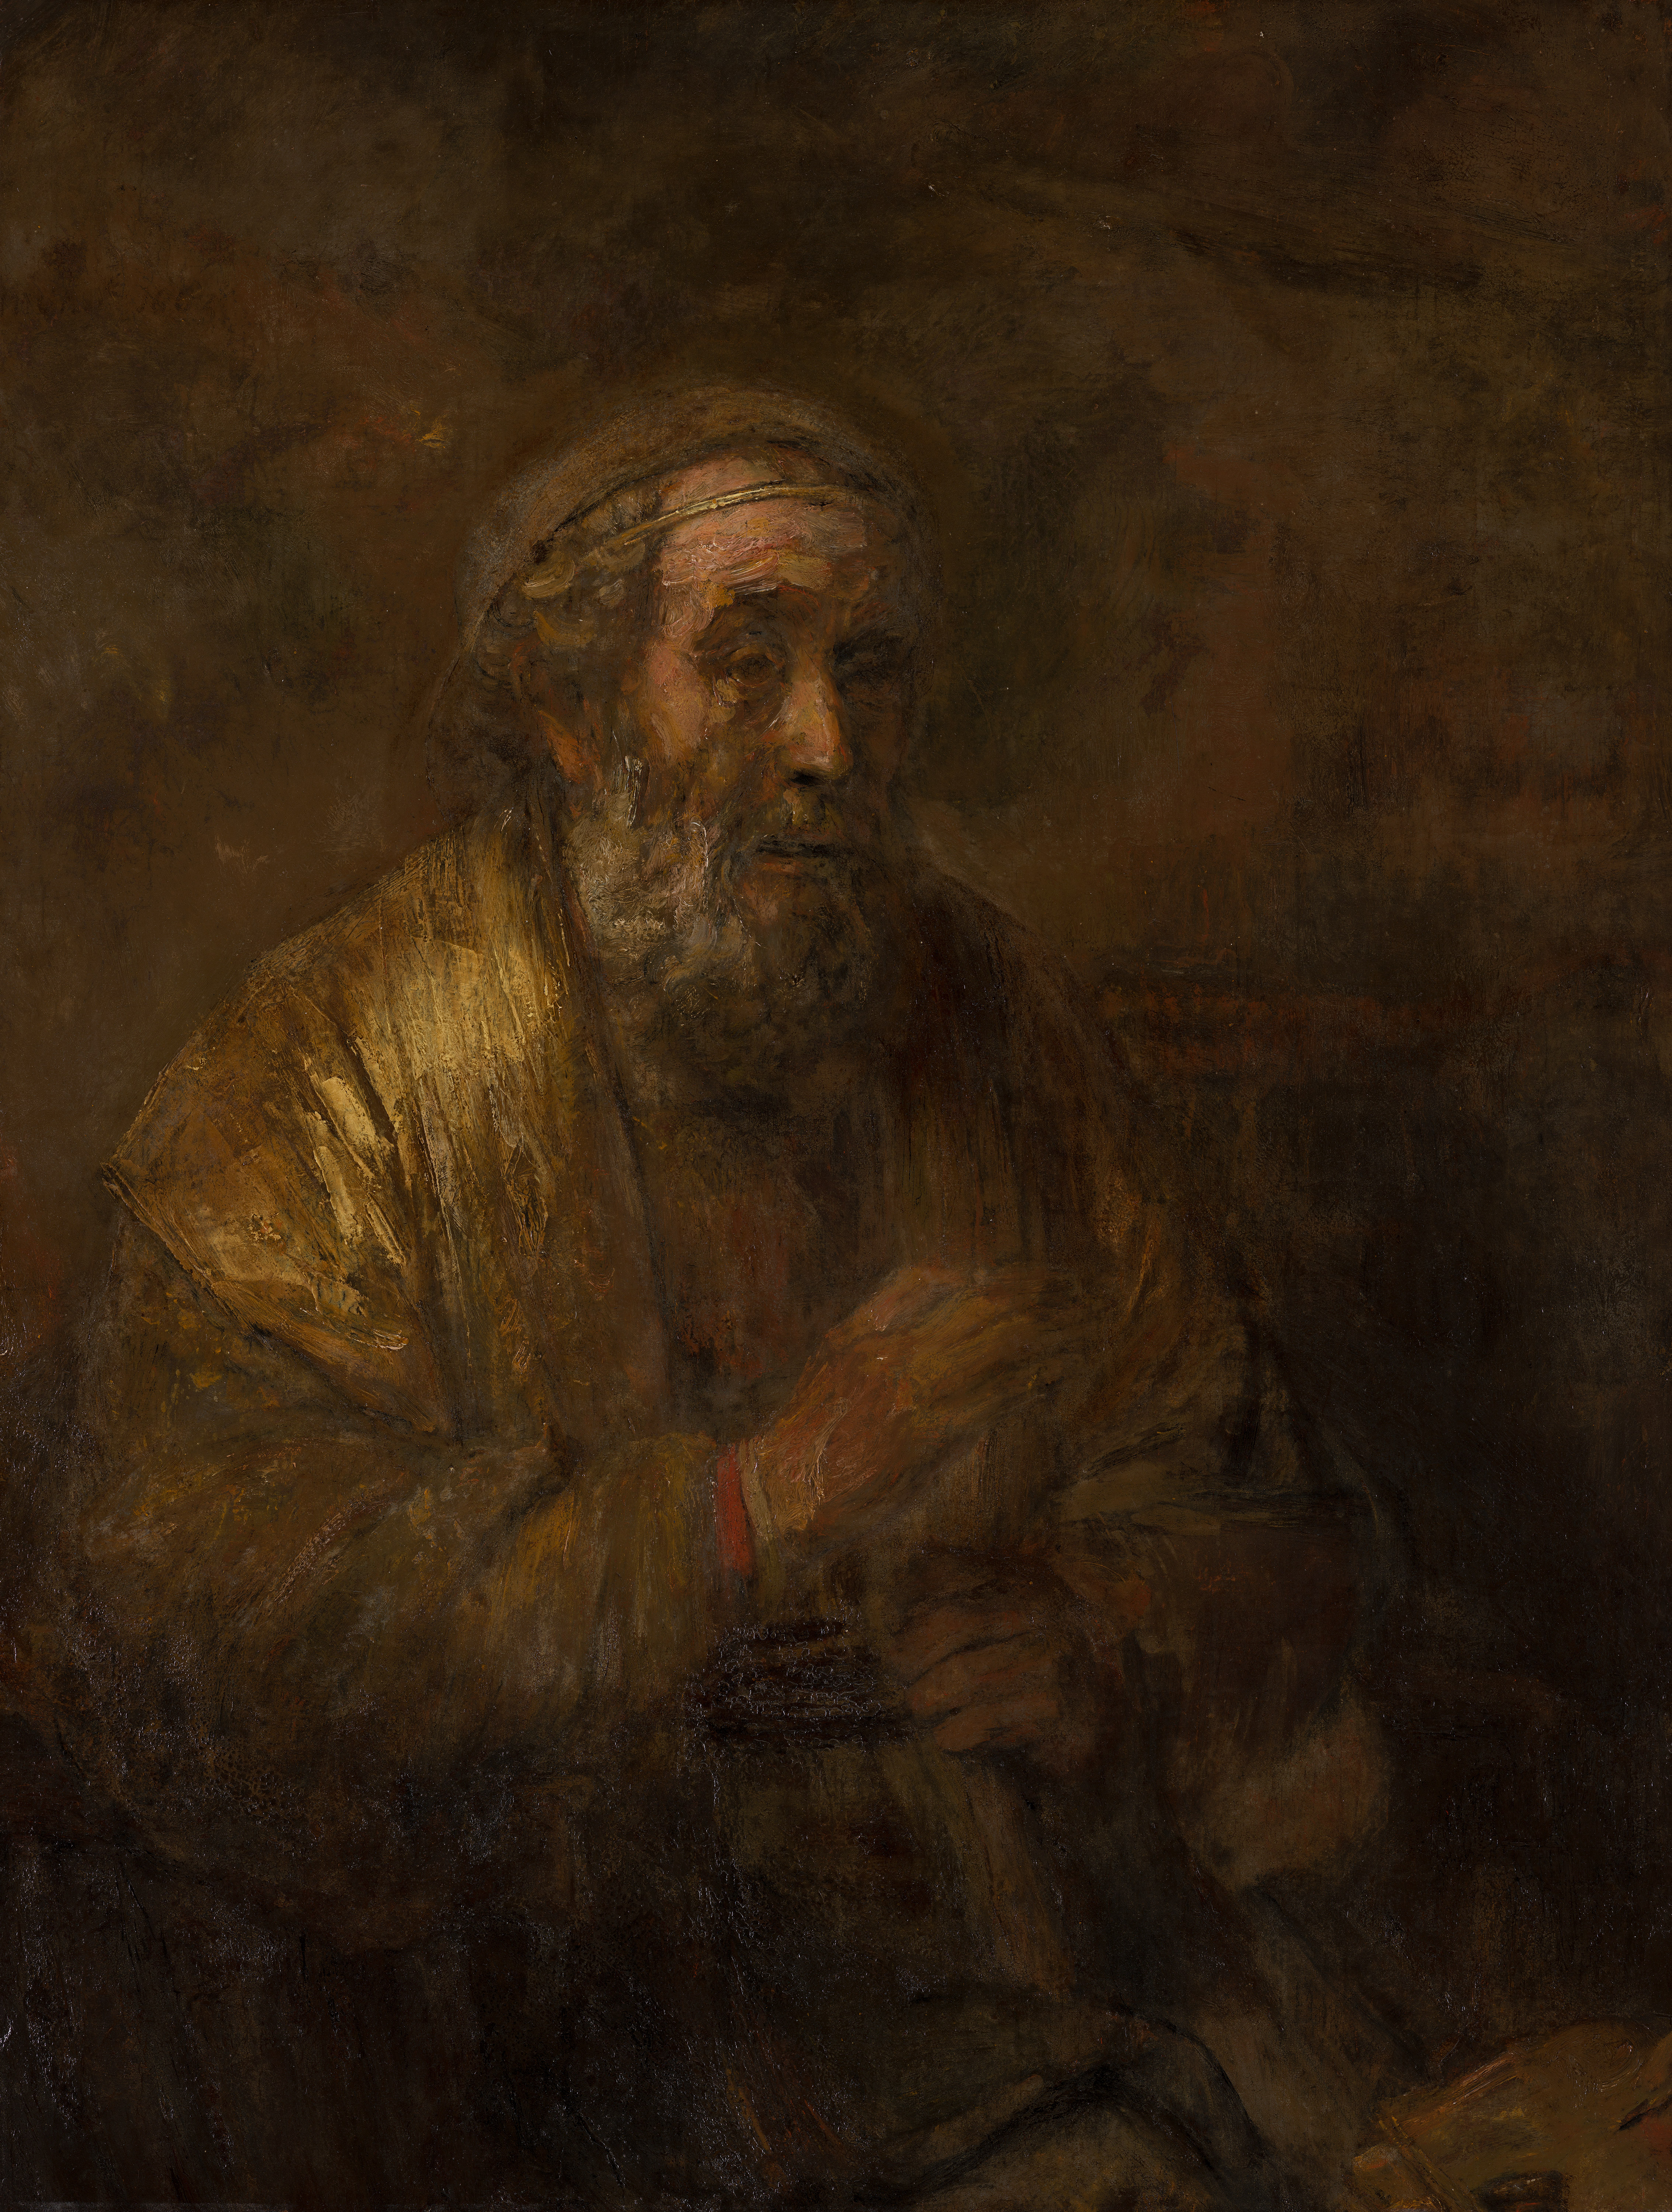 Rembrandt, Homer, 1663. Canvas, 107 x 82 cm.<br/>The Hague, Mauritshuis, bequest of Abraham Bredius, 1946